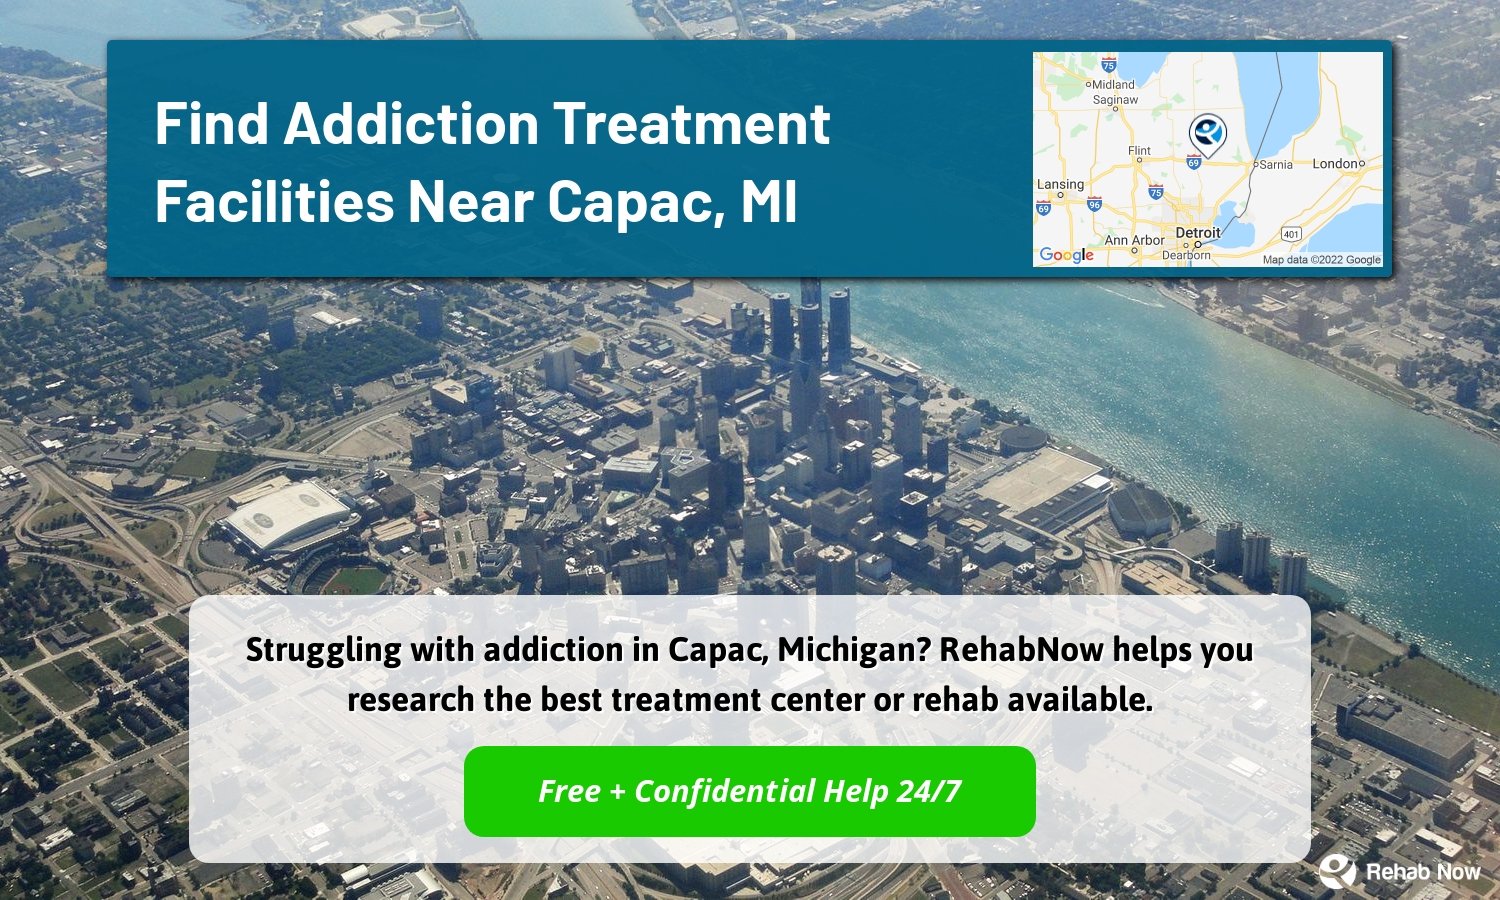 Struggling with addiction in Capac, Michigan? RehabNow helps you research the best treatment center or rehab available.